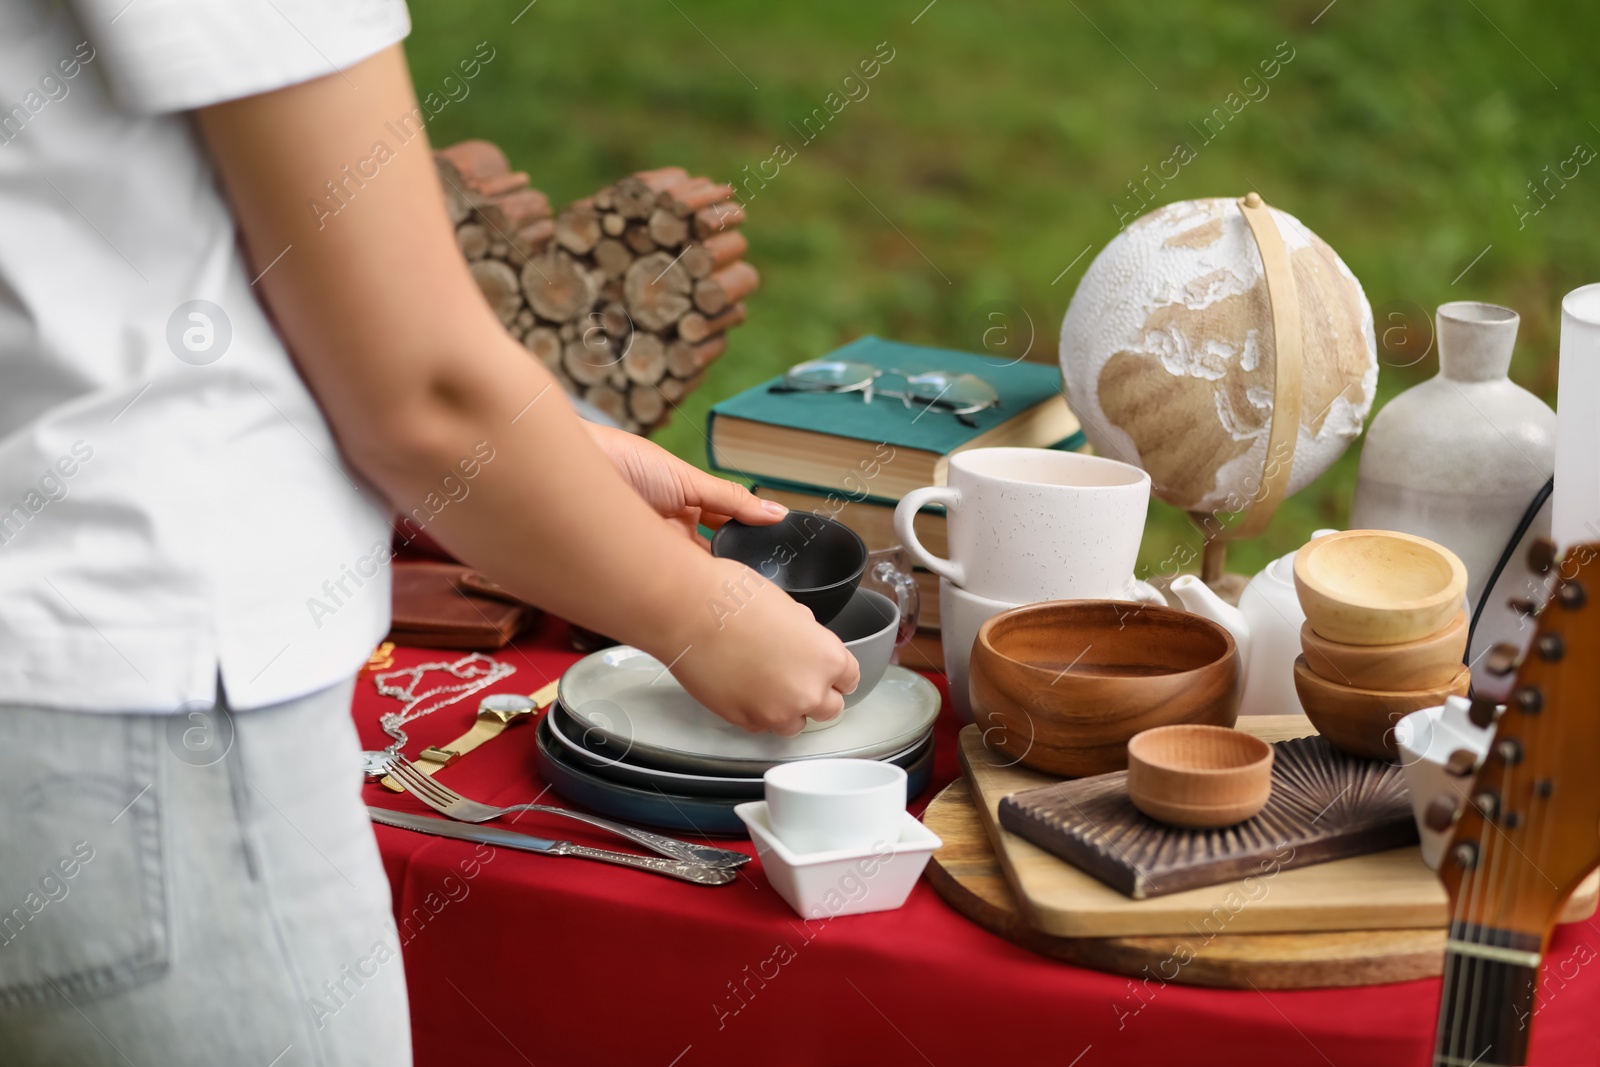 Photo of Woman holding beautiful bowls near table with different items on garage sale, closeup